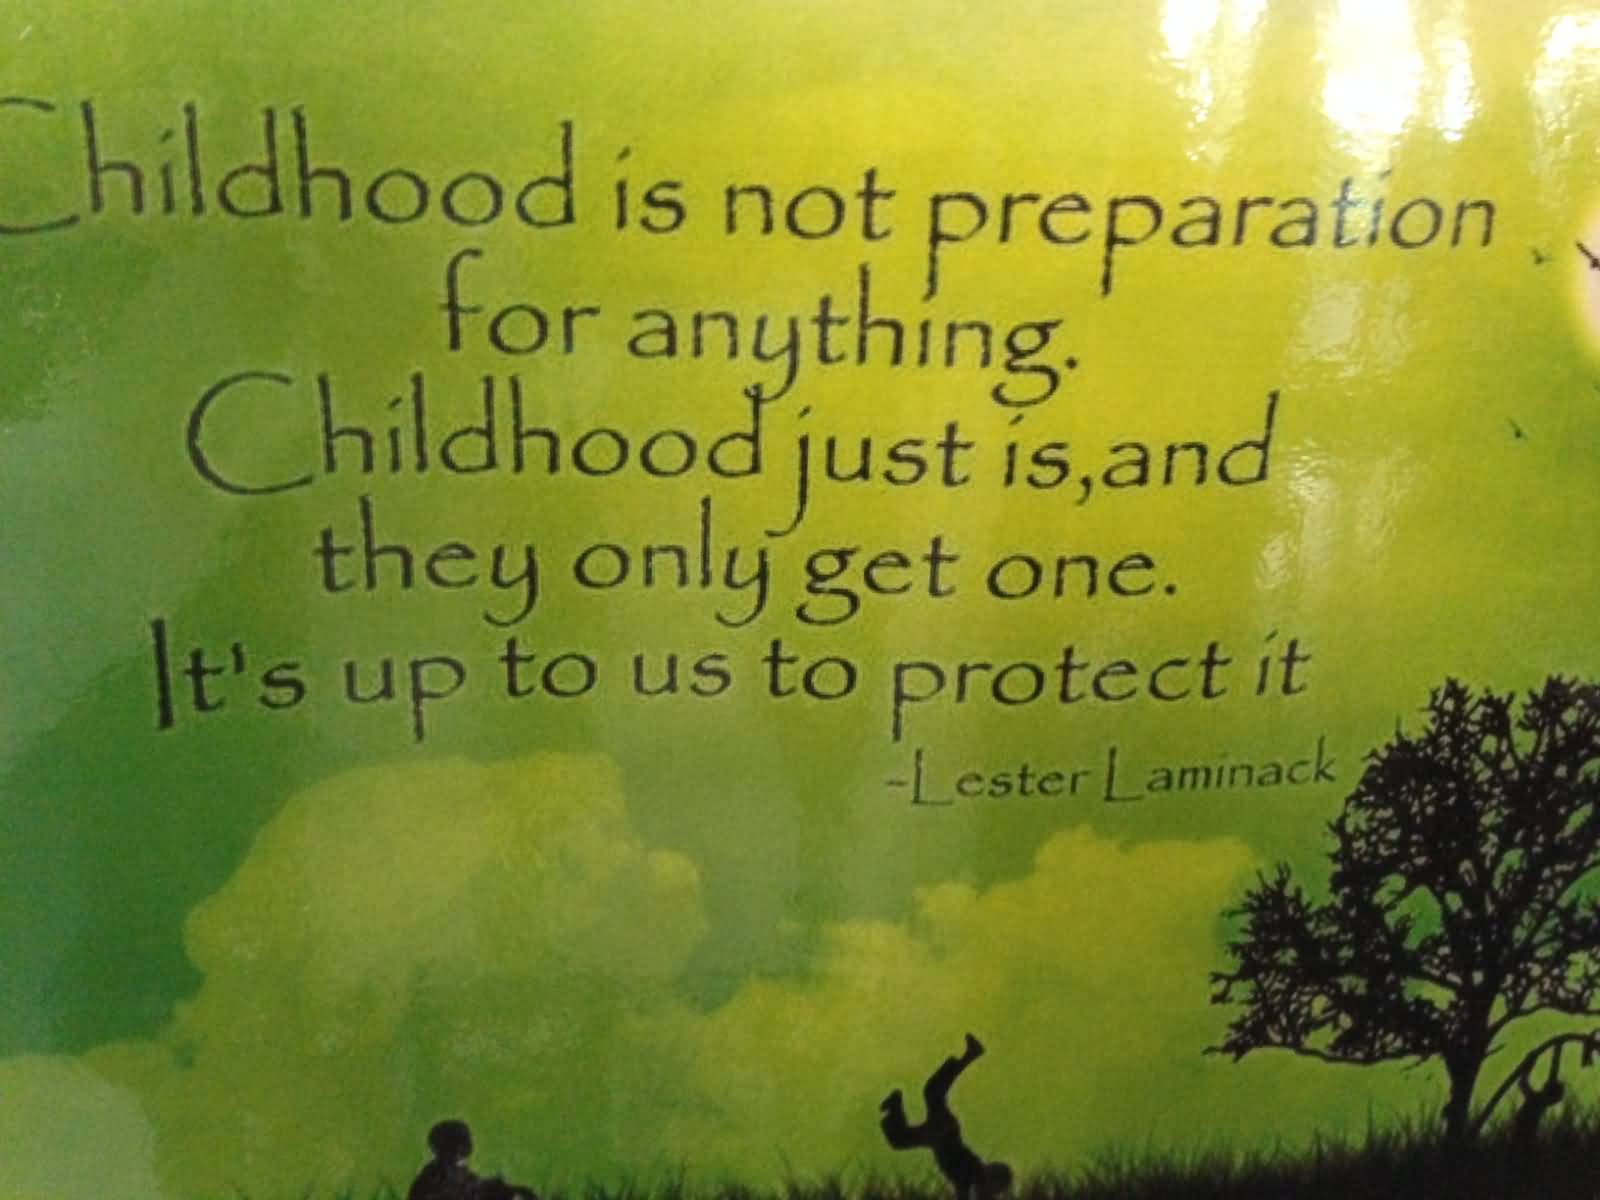 Childhood is not preparation for anything. Childhood just is, and they only get one. It’s up to us to protect it.